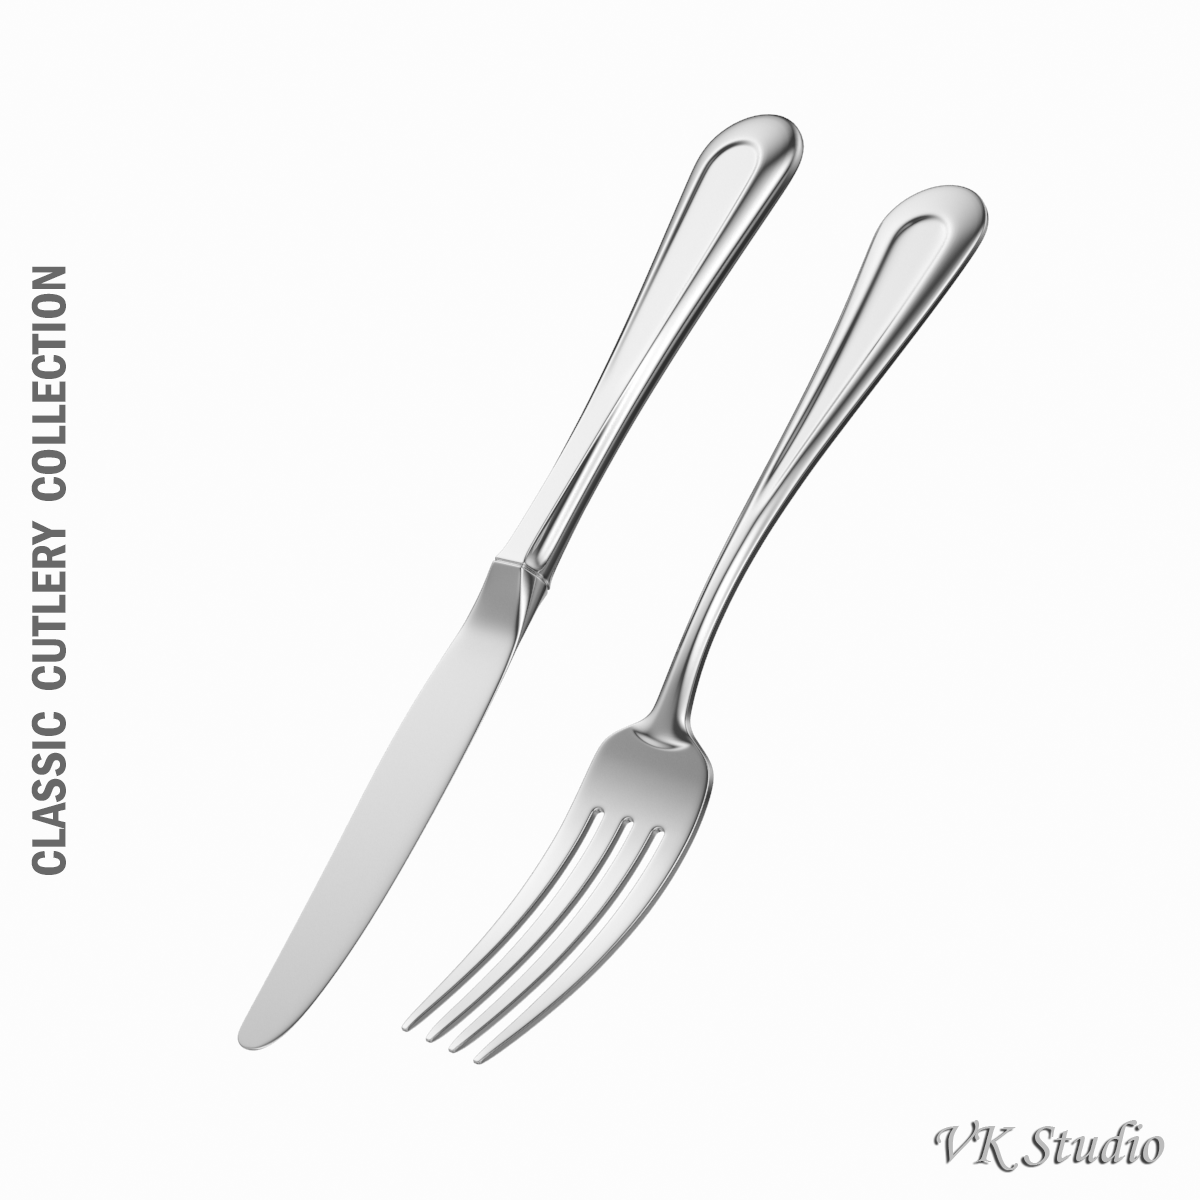 table dinner knife and fork classic cutlery 3d model 3ds max fbx c4d ma mb obj 284032